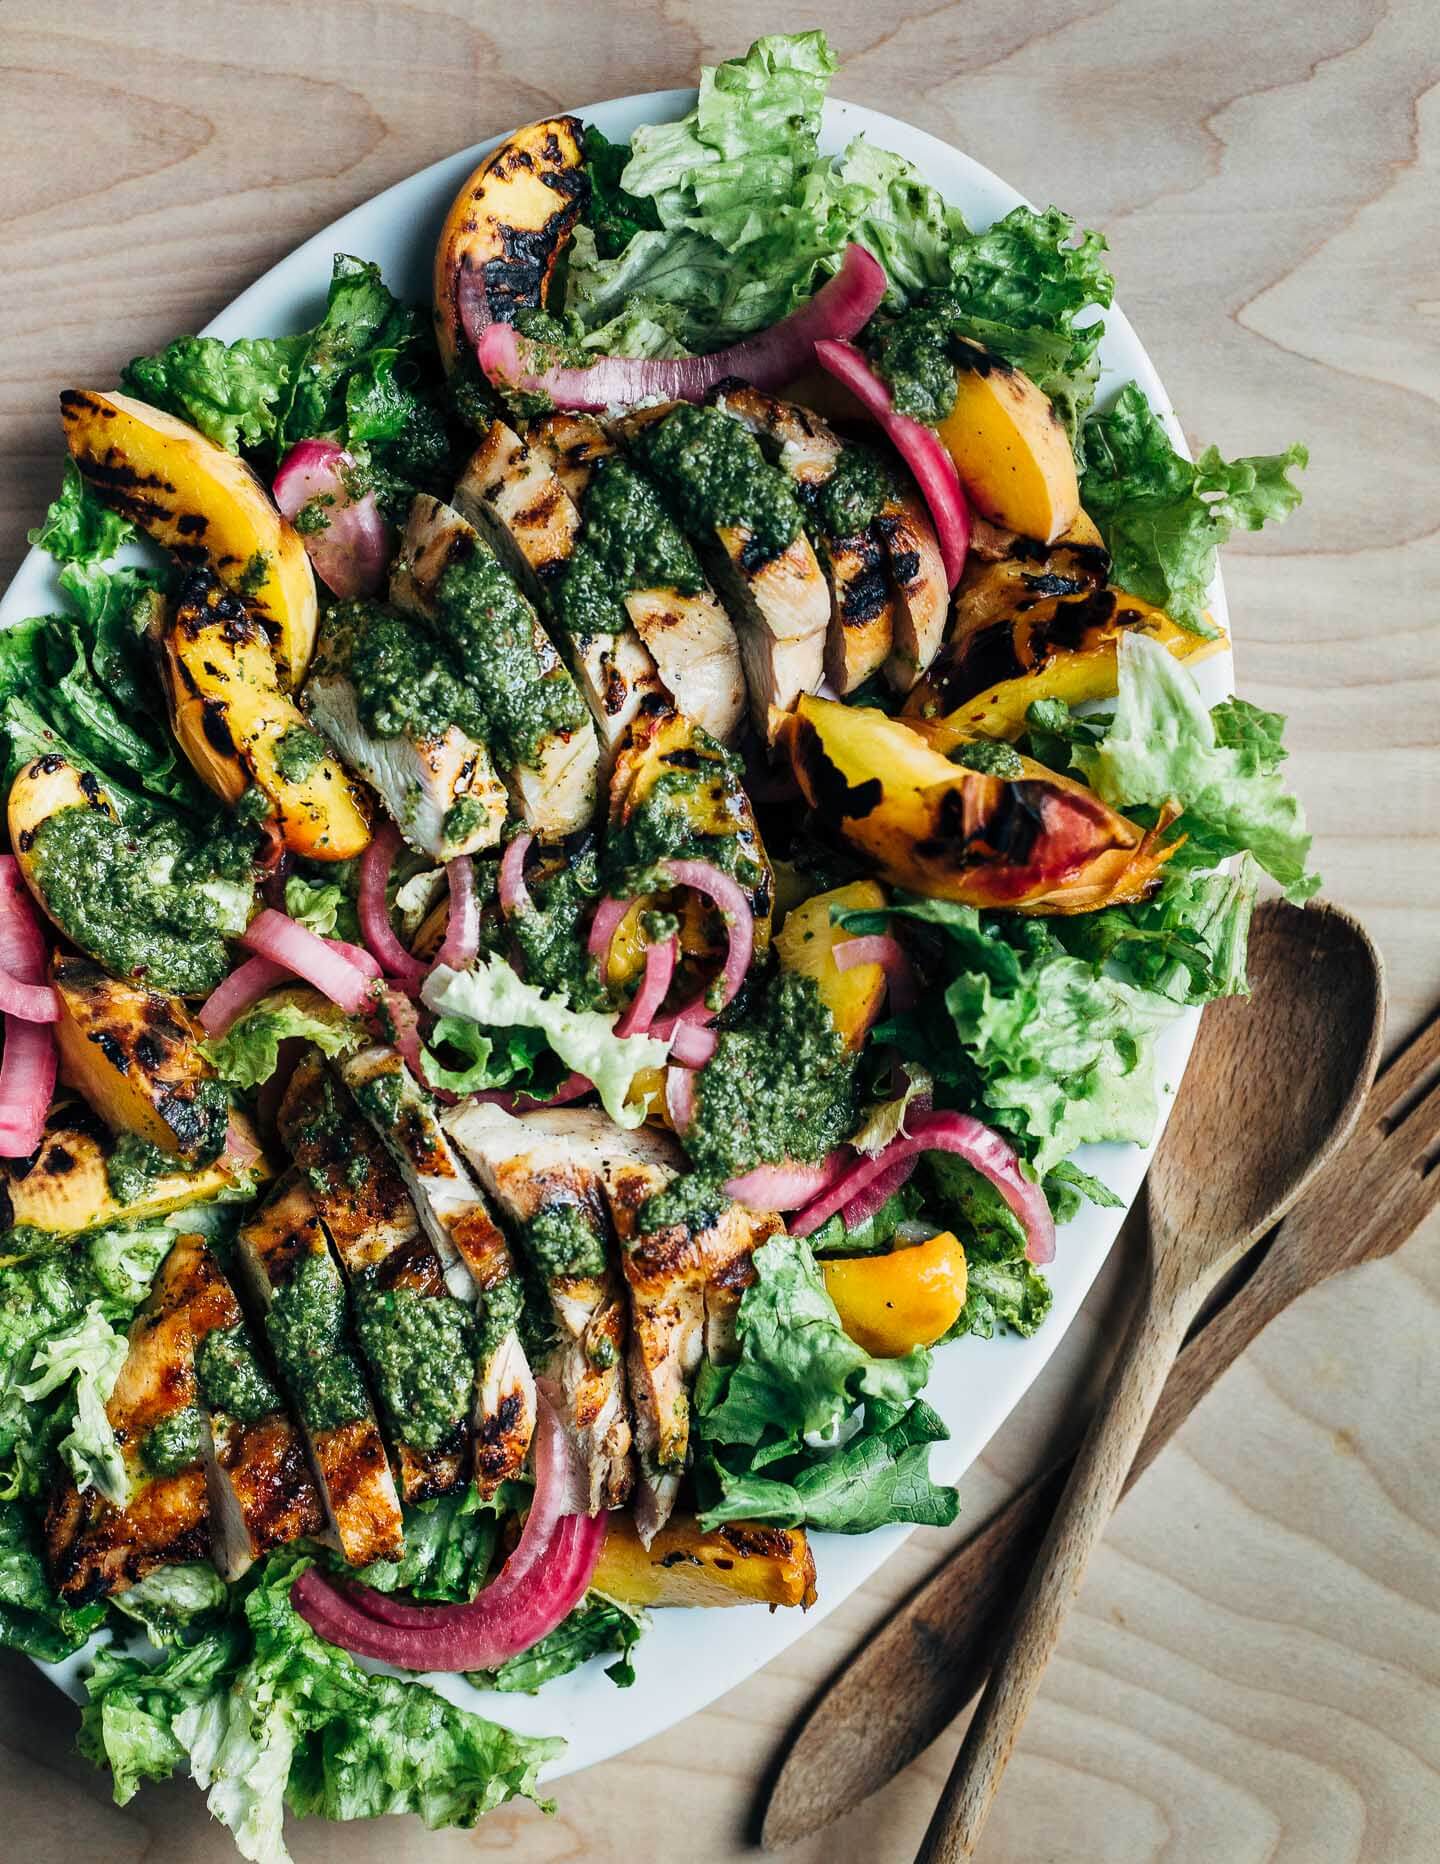 A colorful, summer-inspired grilled chicken and peach salad, pickled onions, greens, and basil vinaigrette.